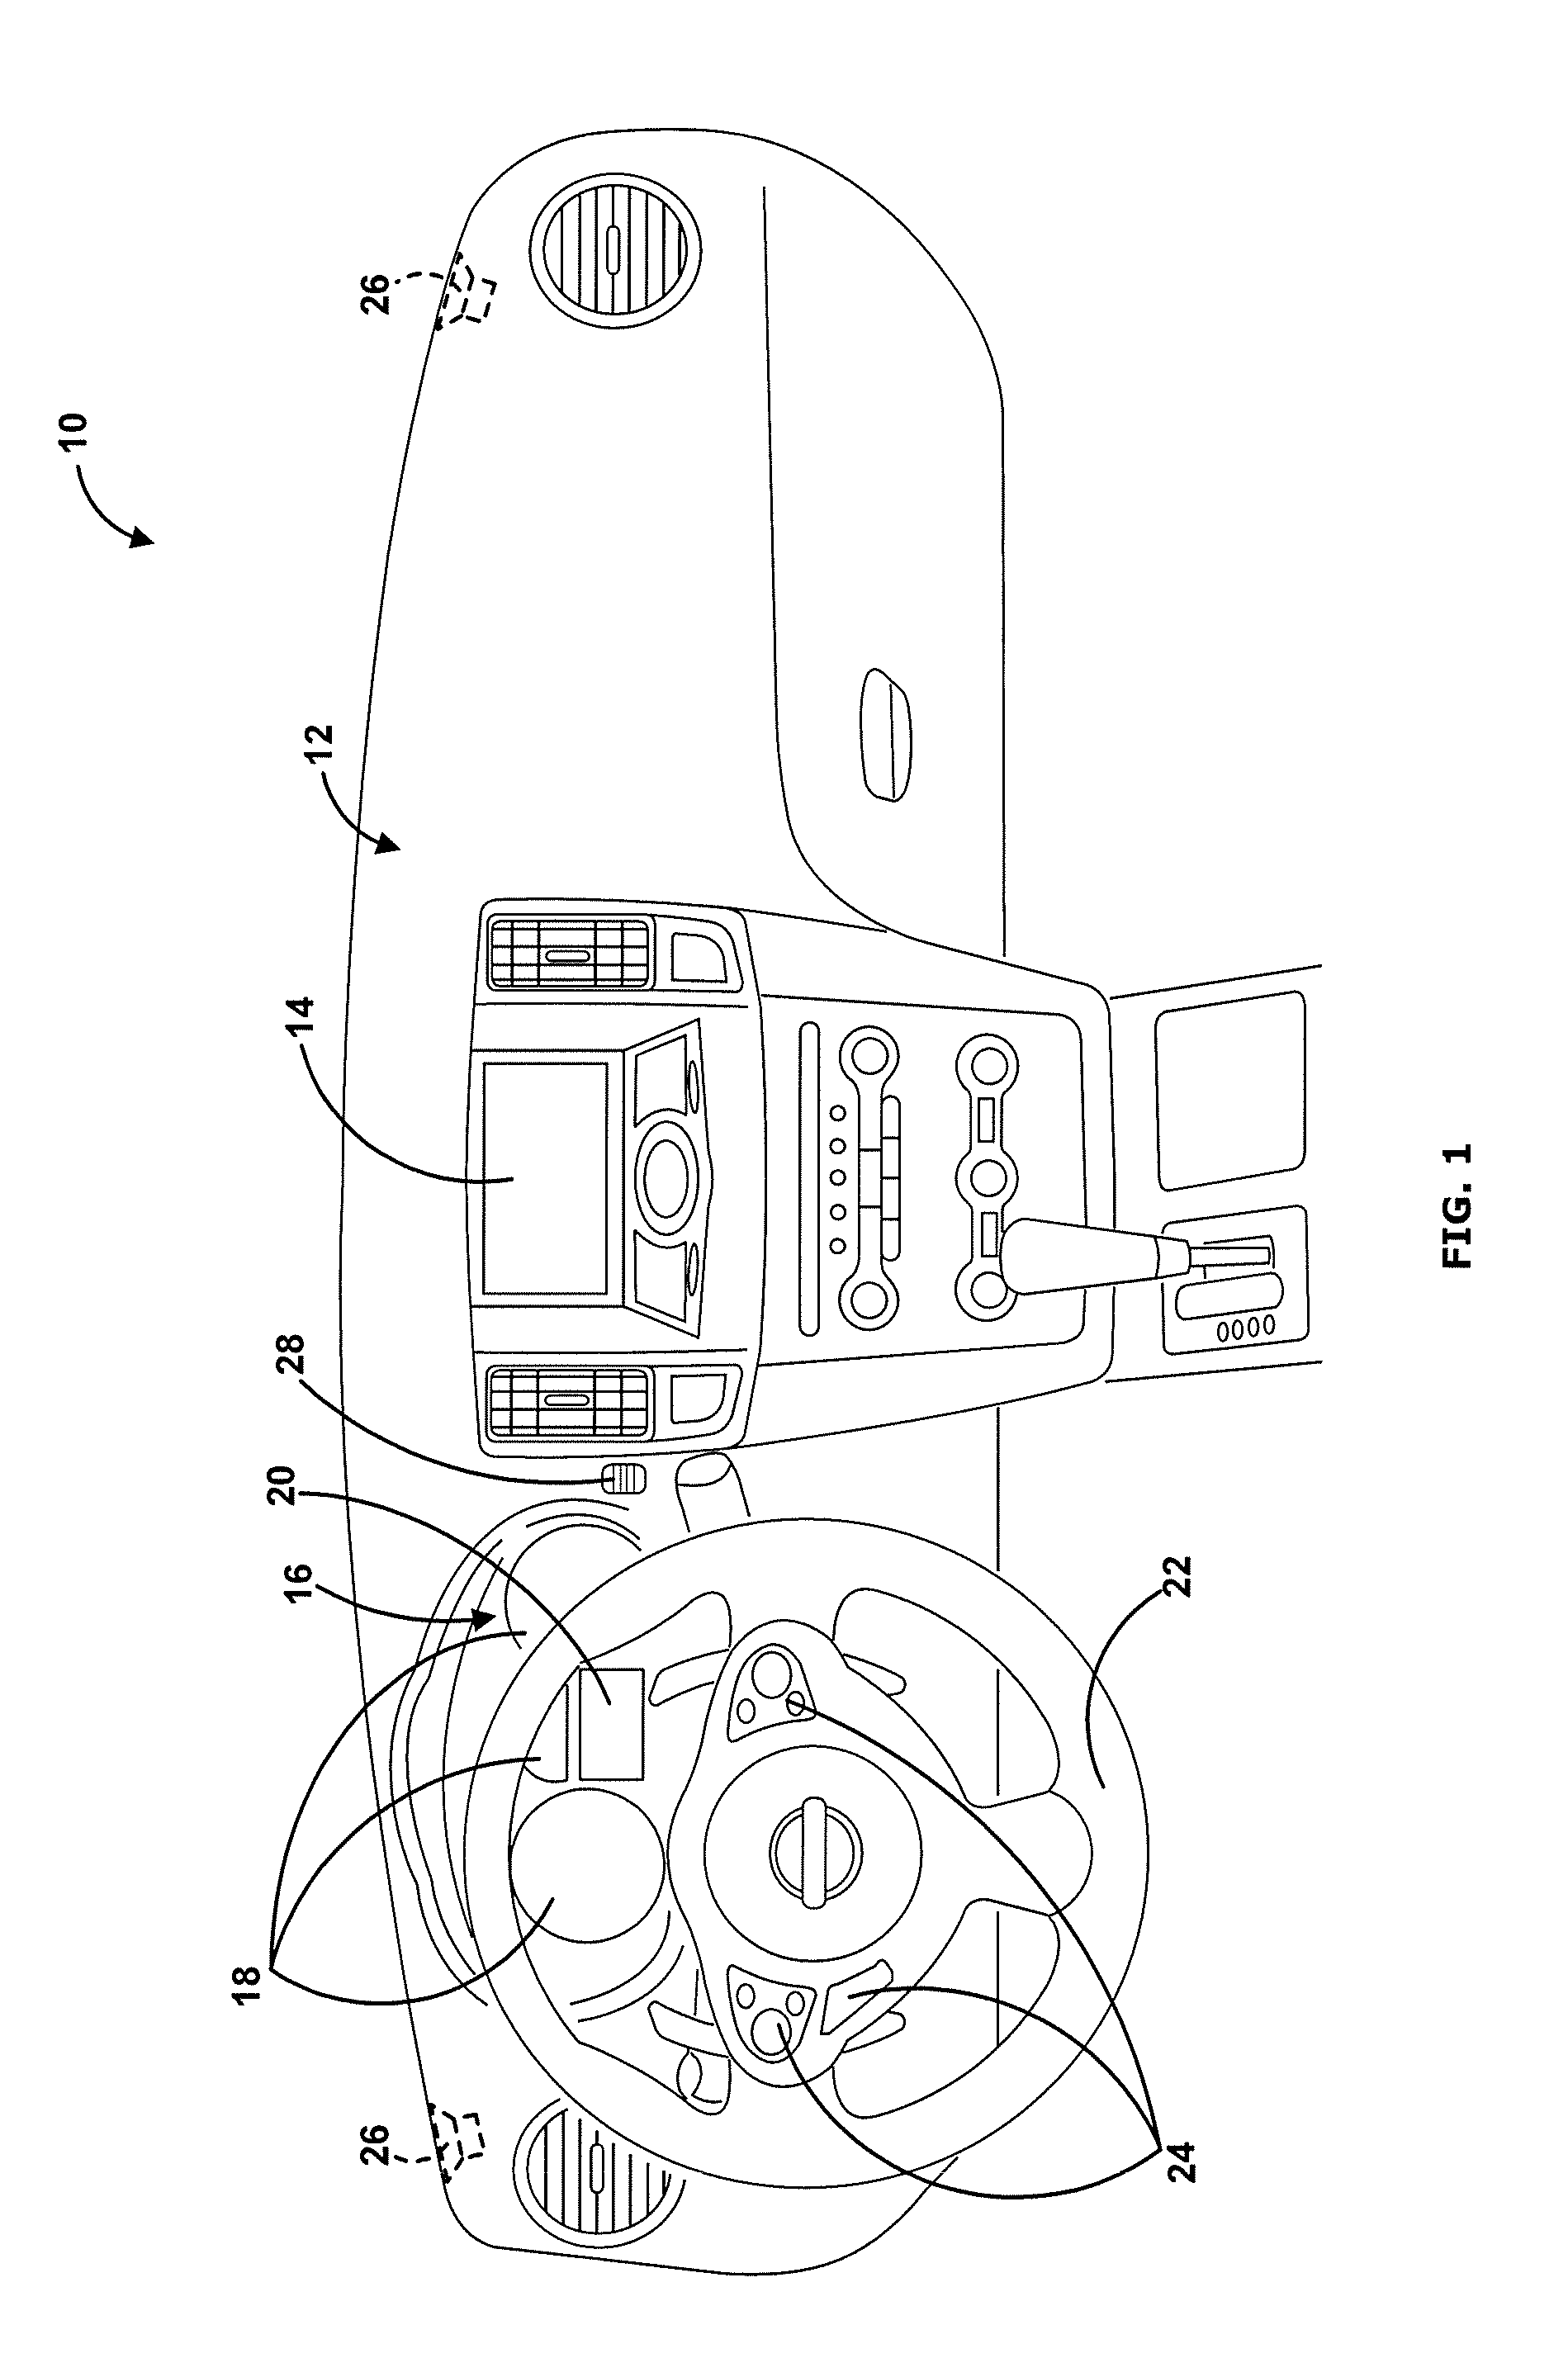 Vehicle text messaging system and method using a meter cluster display